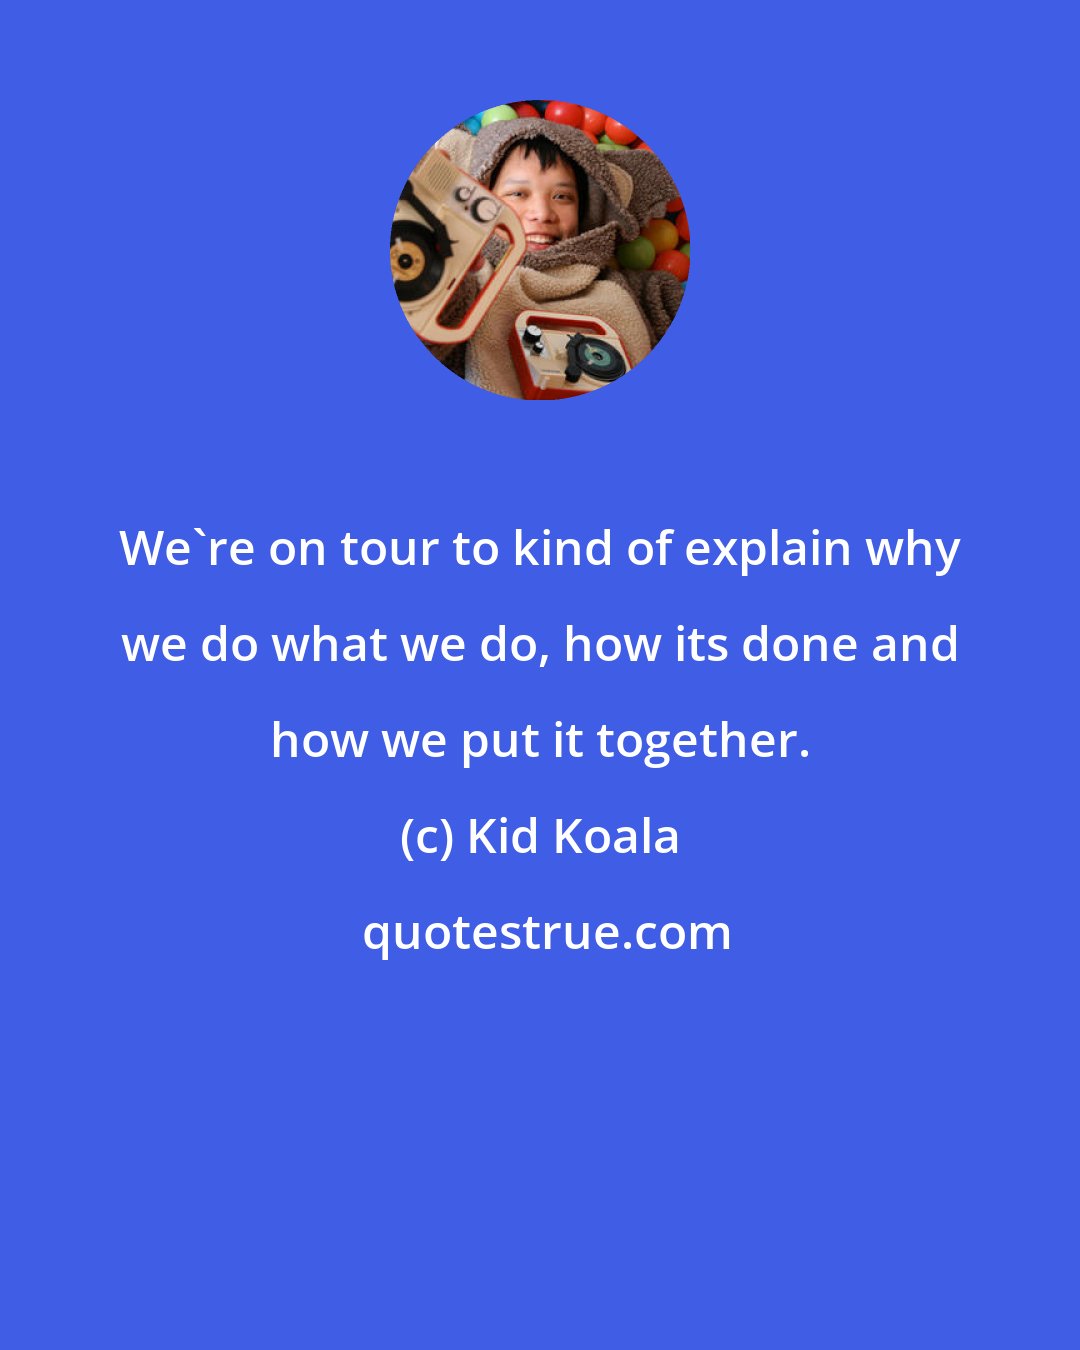 Kid Koala: We're on tour to kind of explain why we do what we do, how its done and how we put it together.